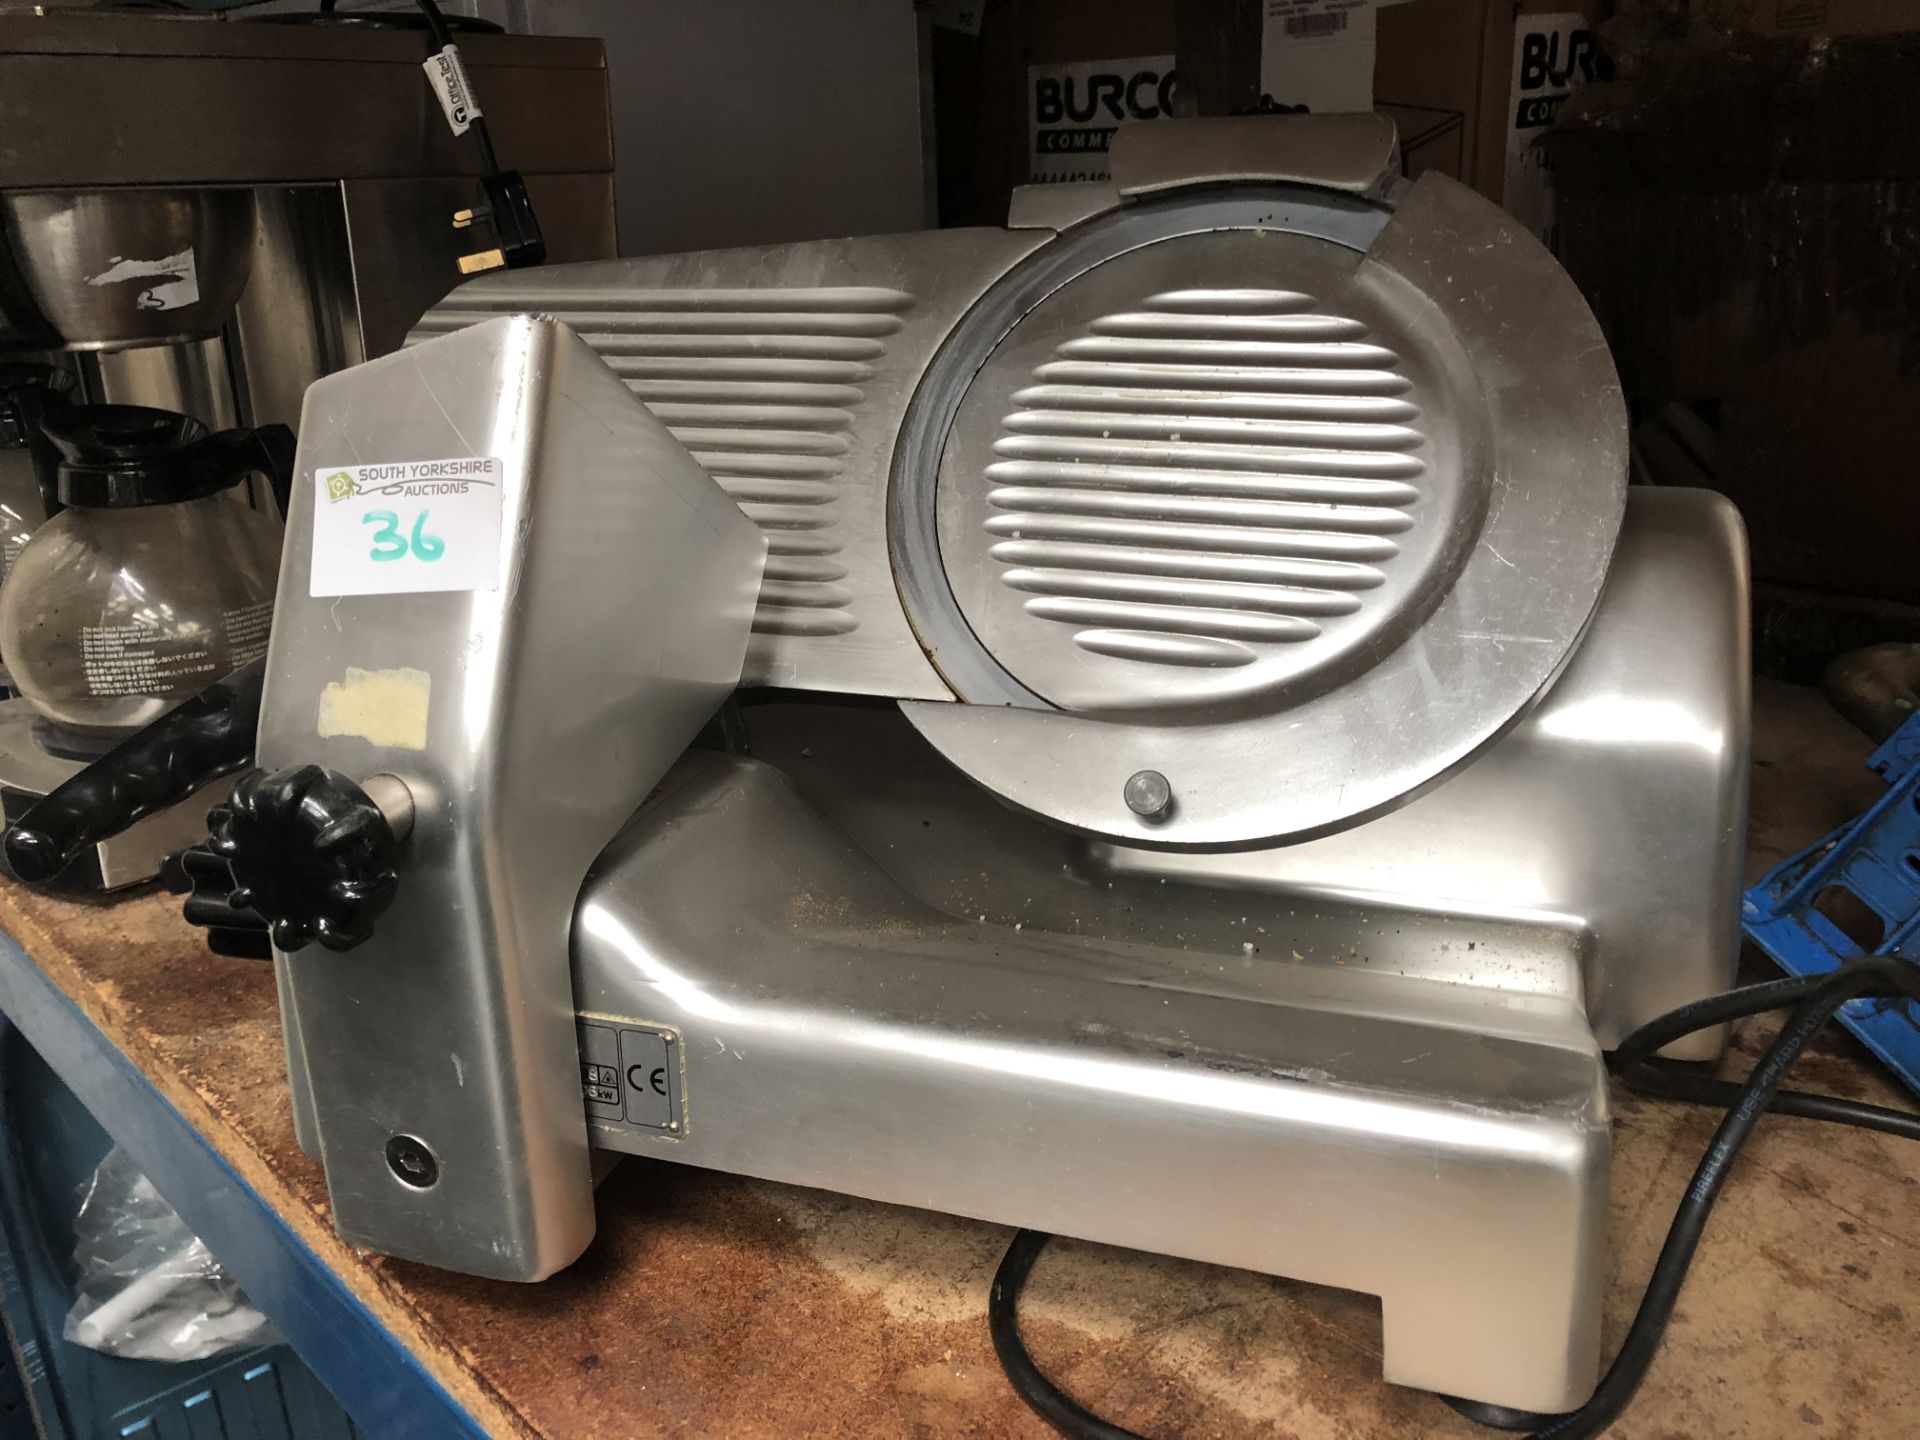 10 " Meat Slicer working but no Carriage